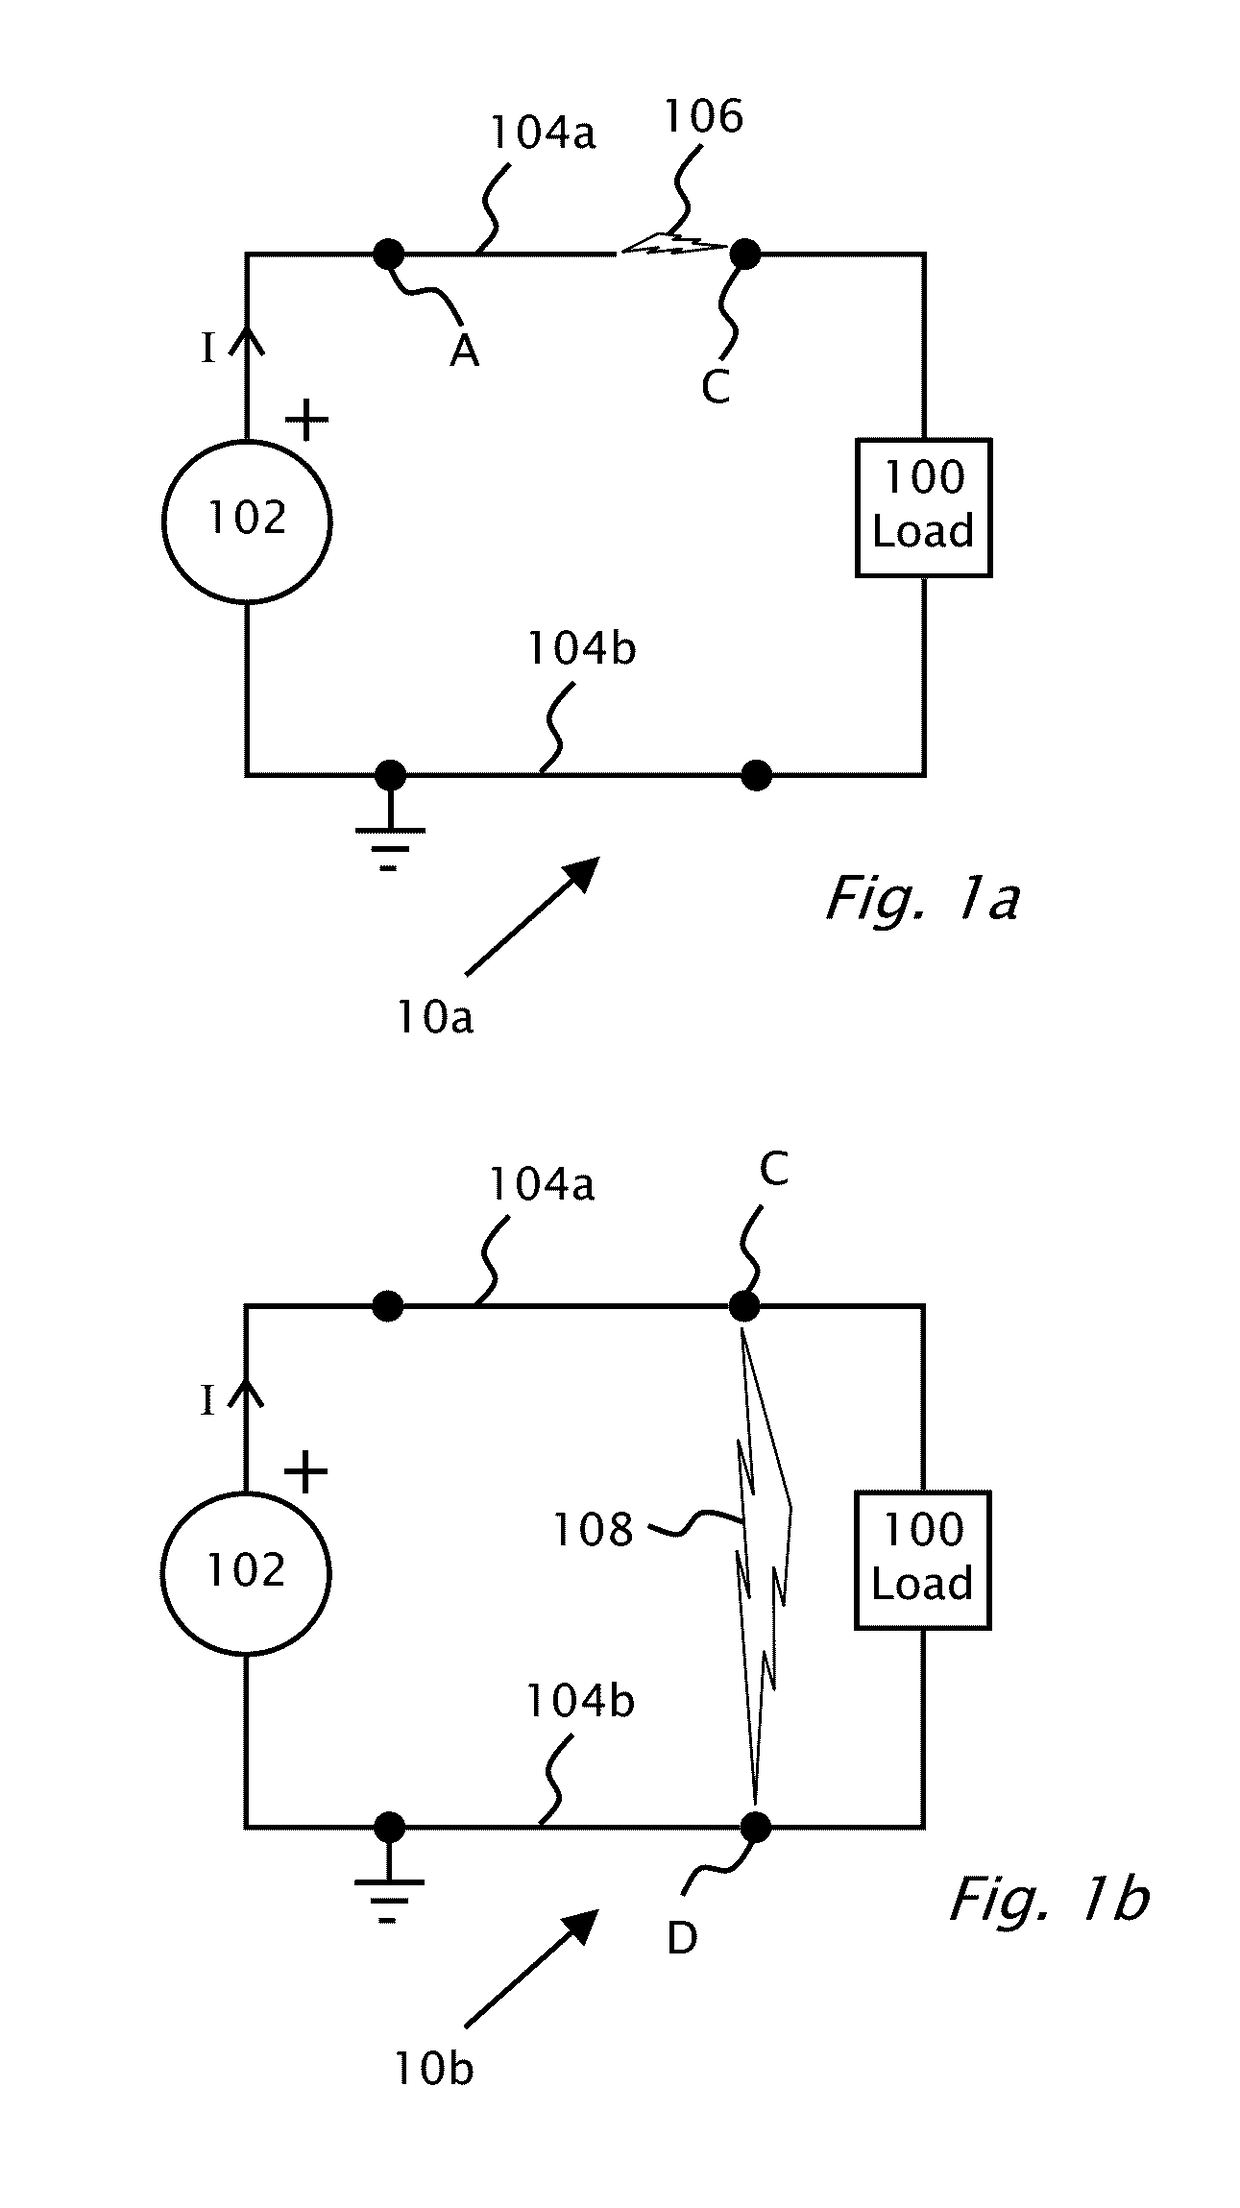 Arc Detection and Prevention in a Power Generation System